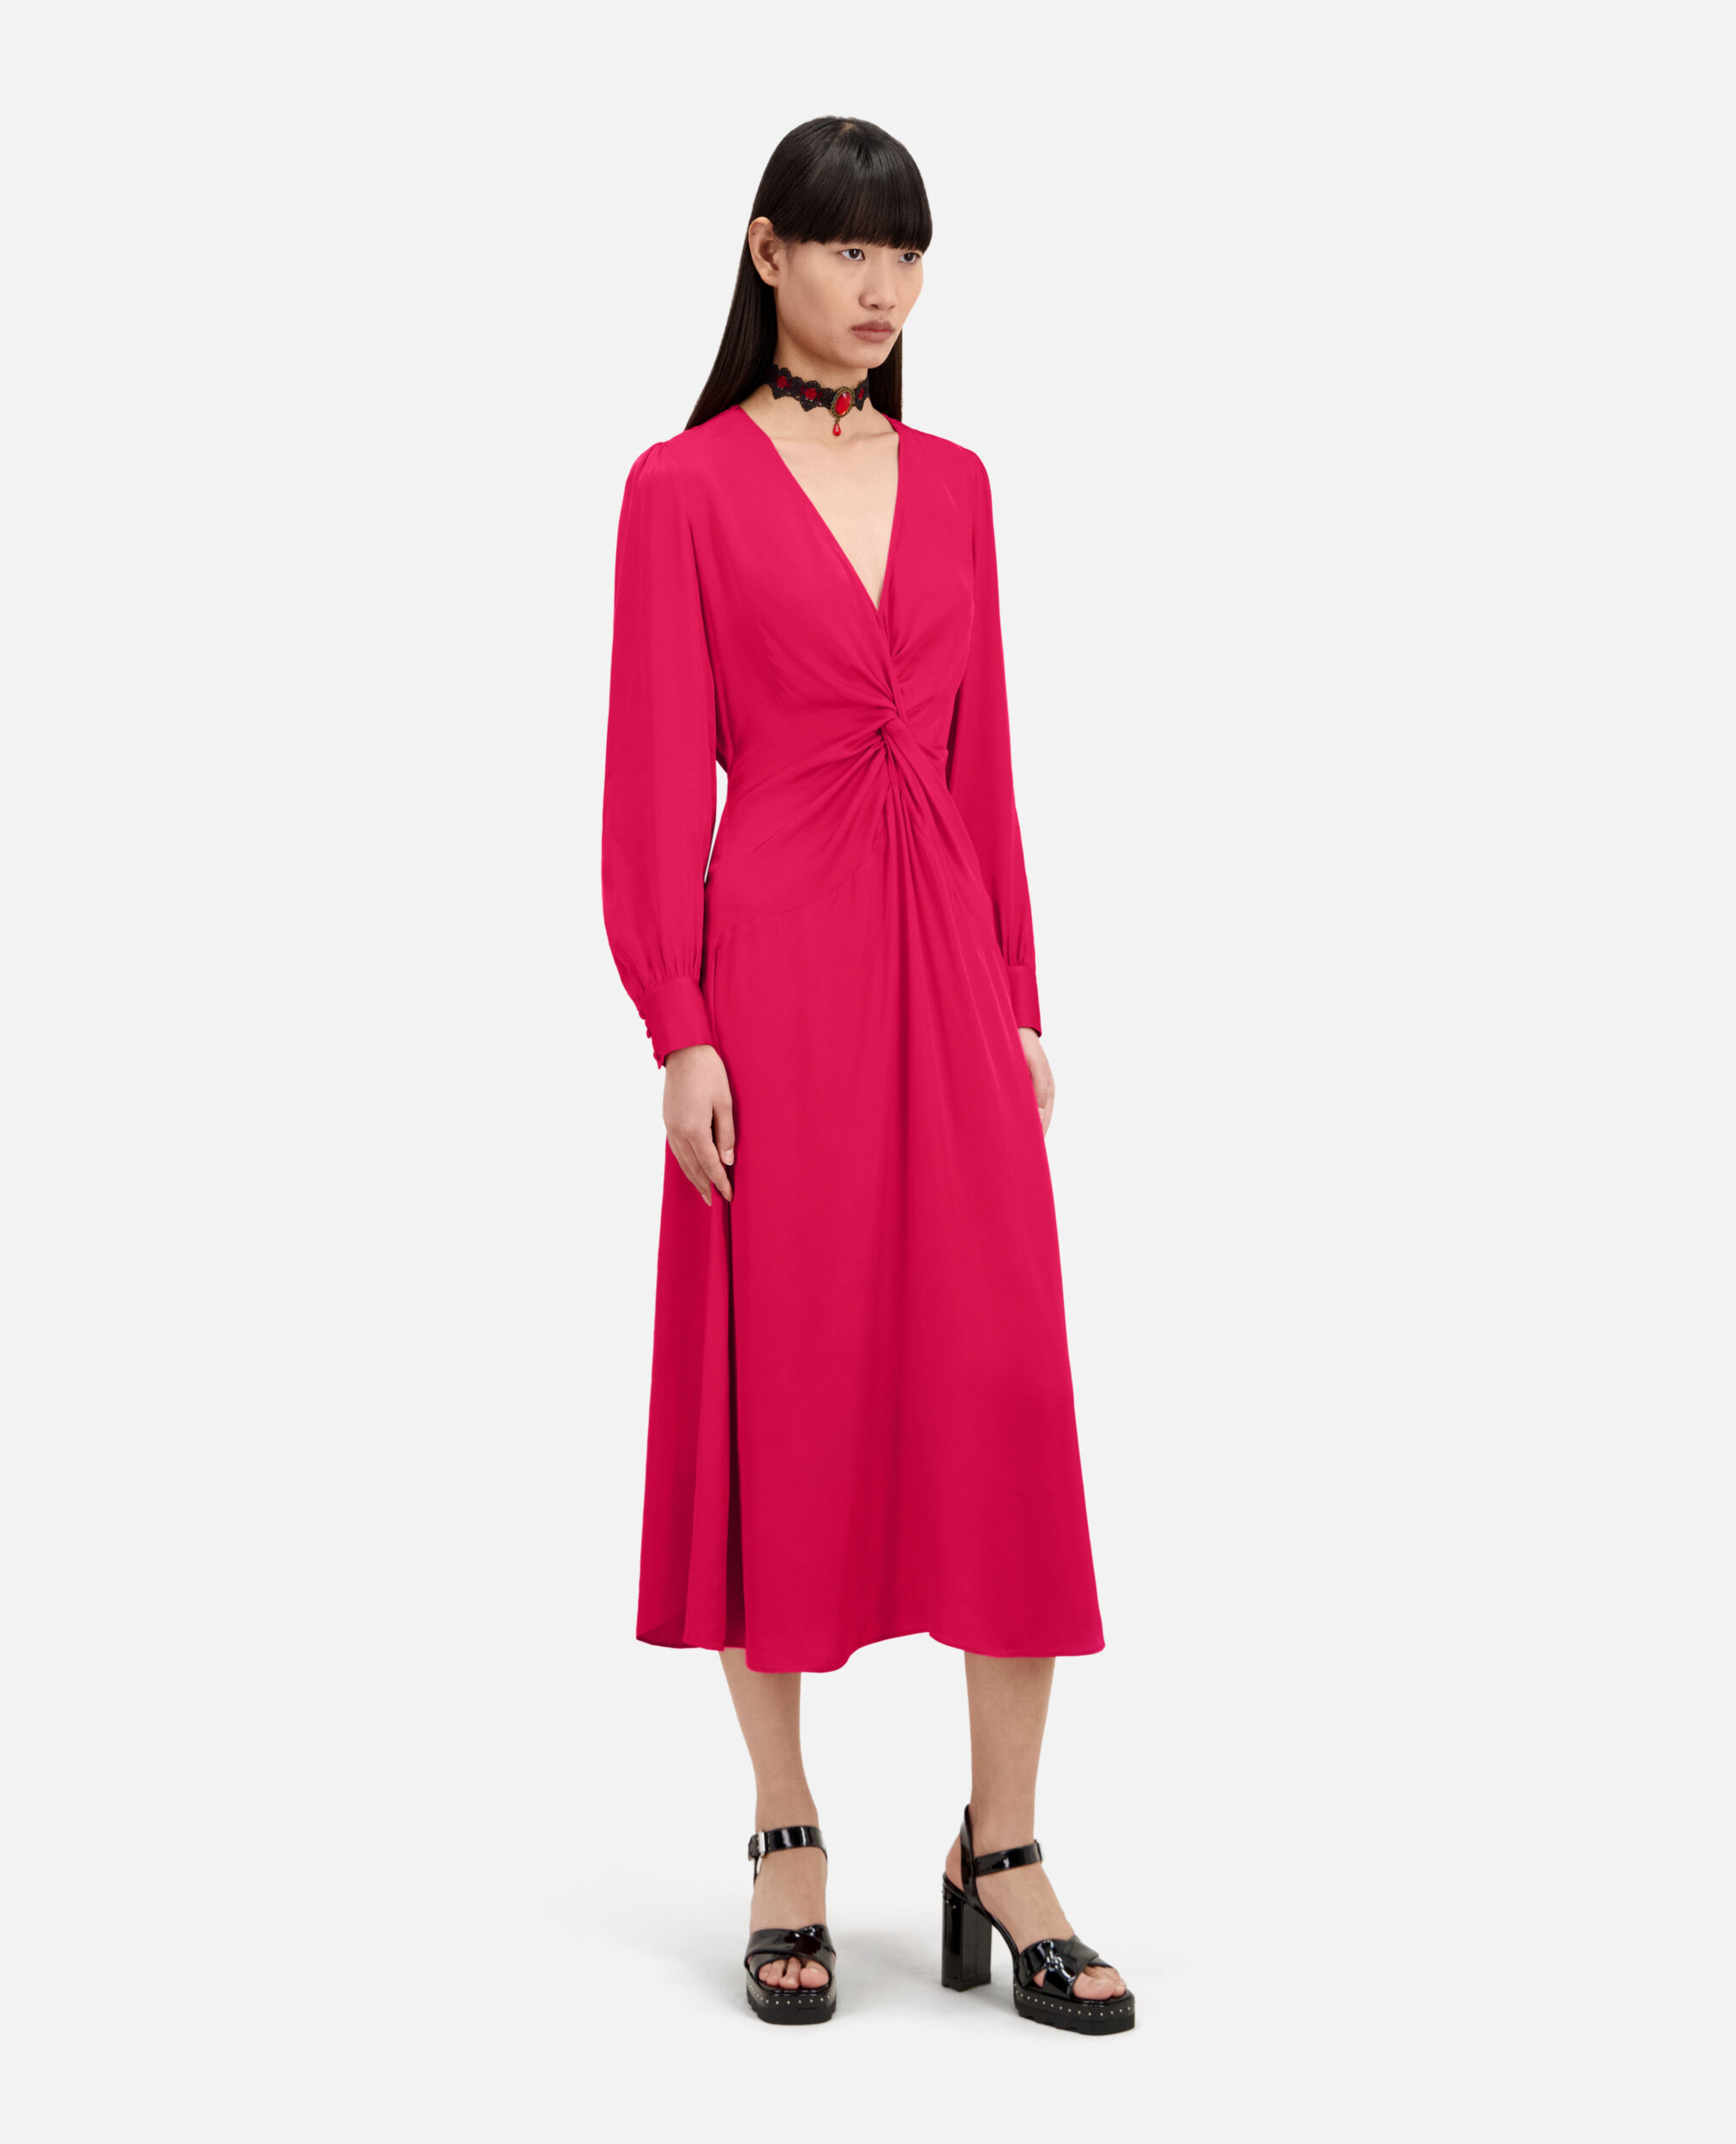 Robe longue rouge avec nœud, CHERRY, hi-res image number null